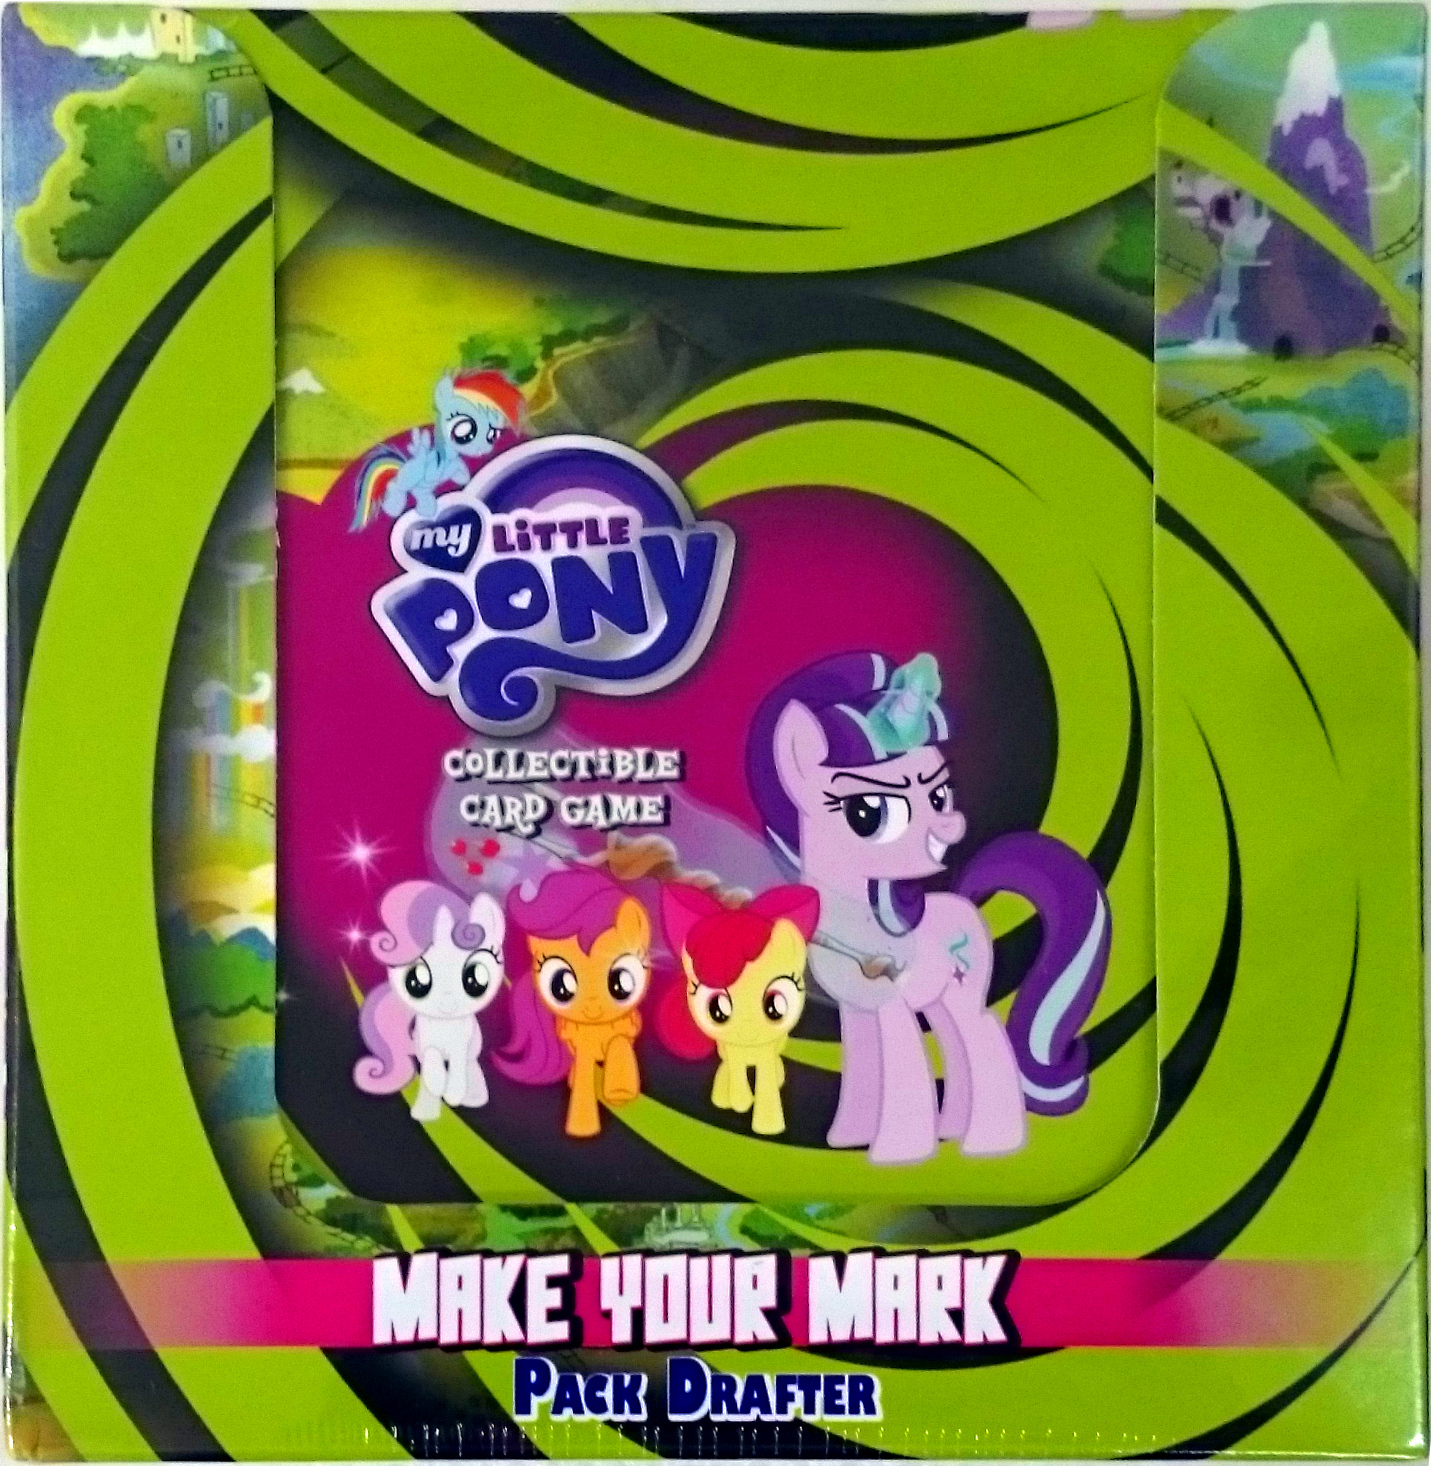 My Little Pony CCG 'Marks in Time' Make Your Mark Pack Drafter 8ct Display Box